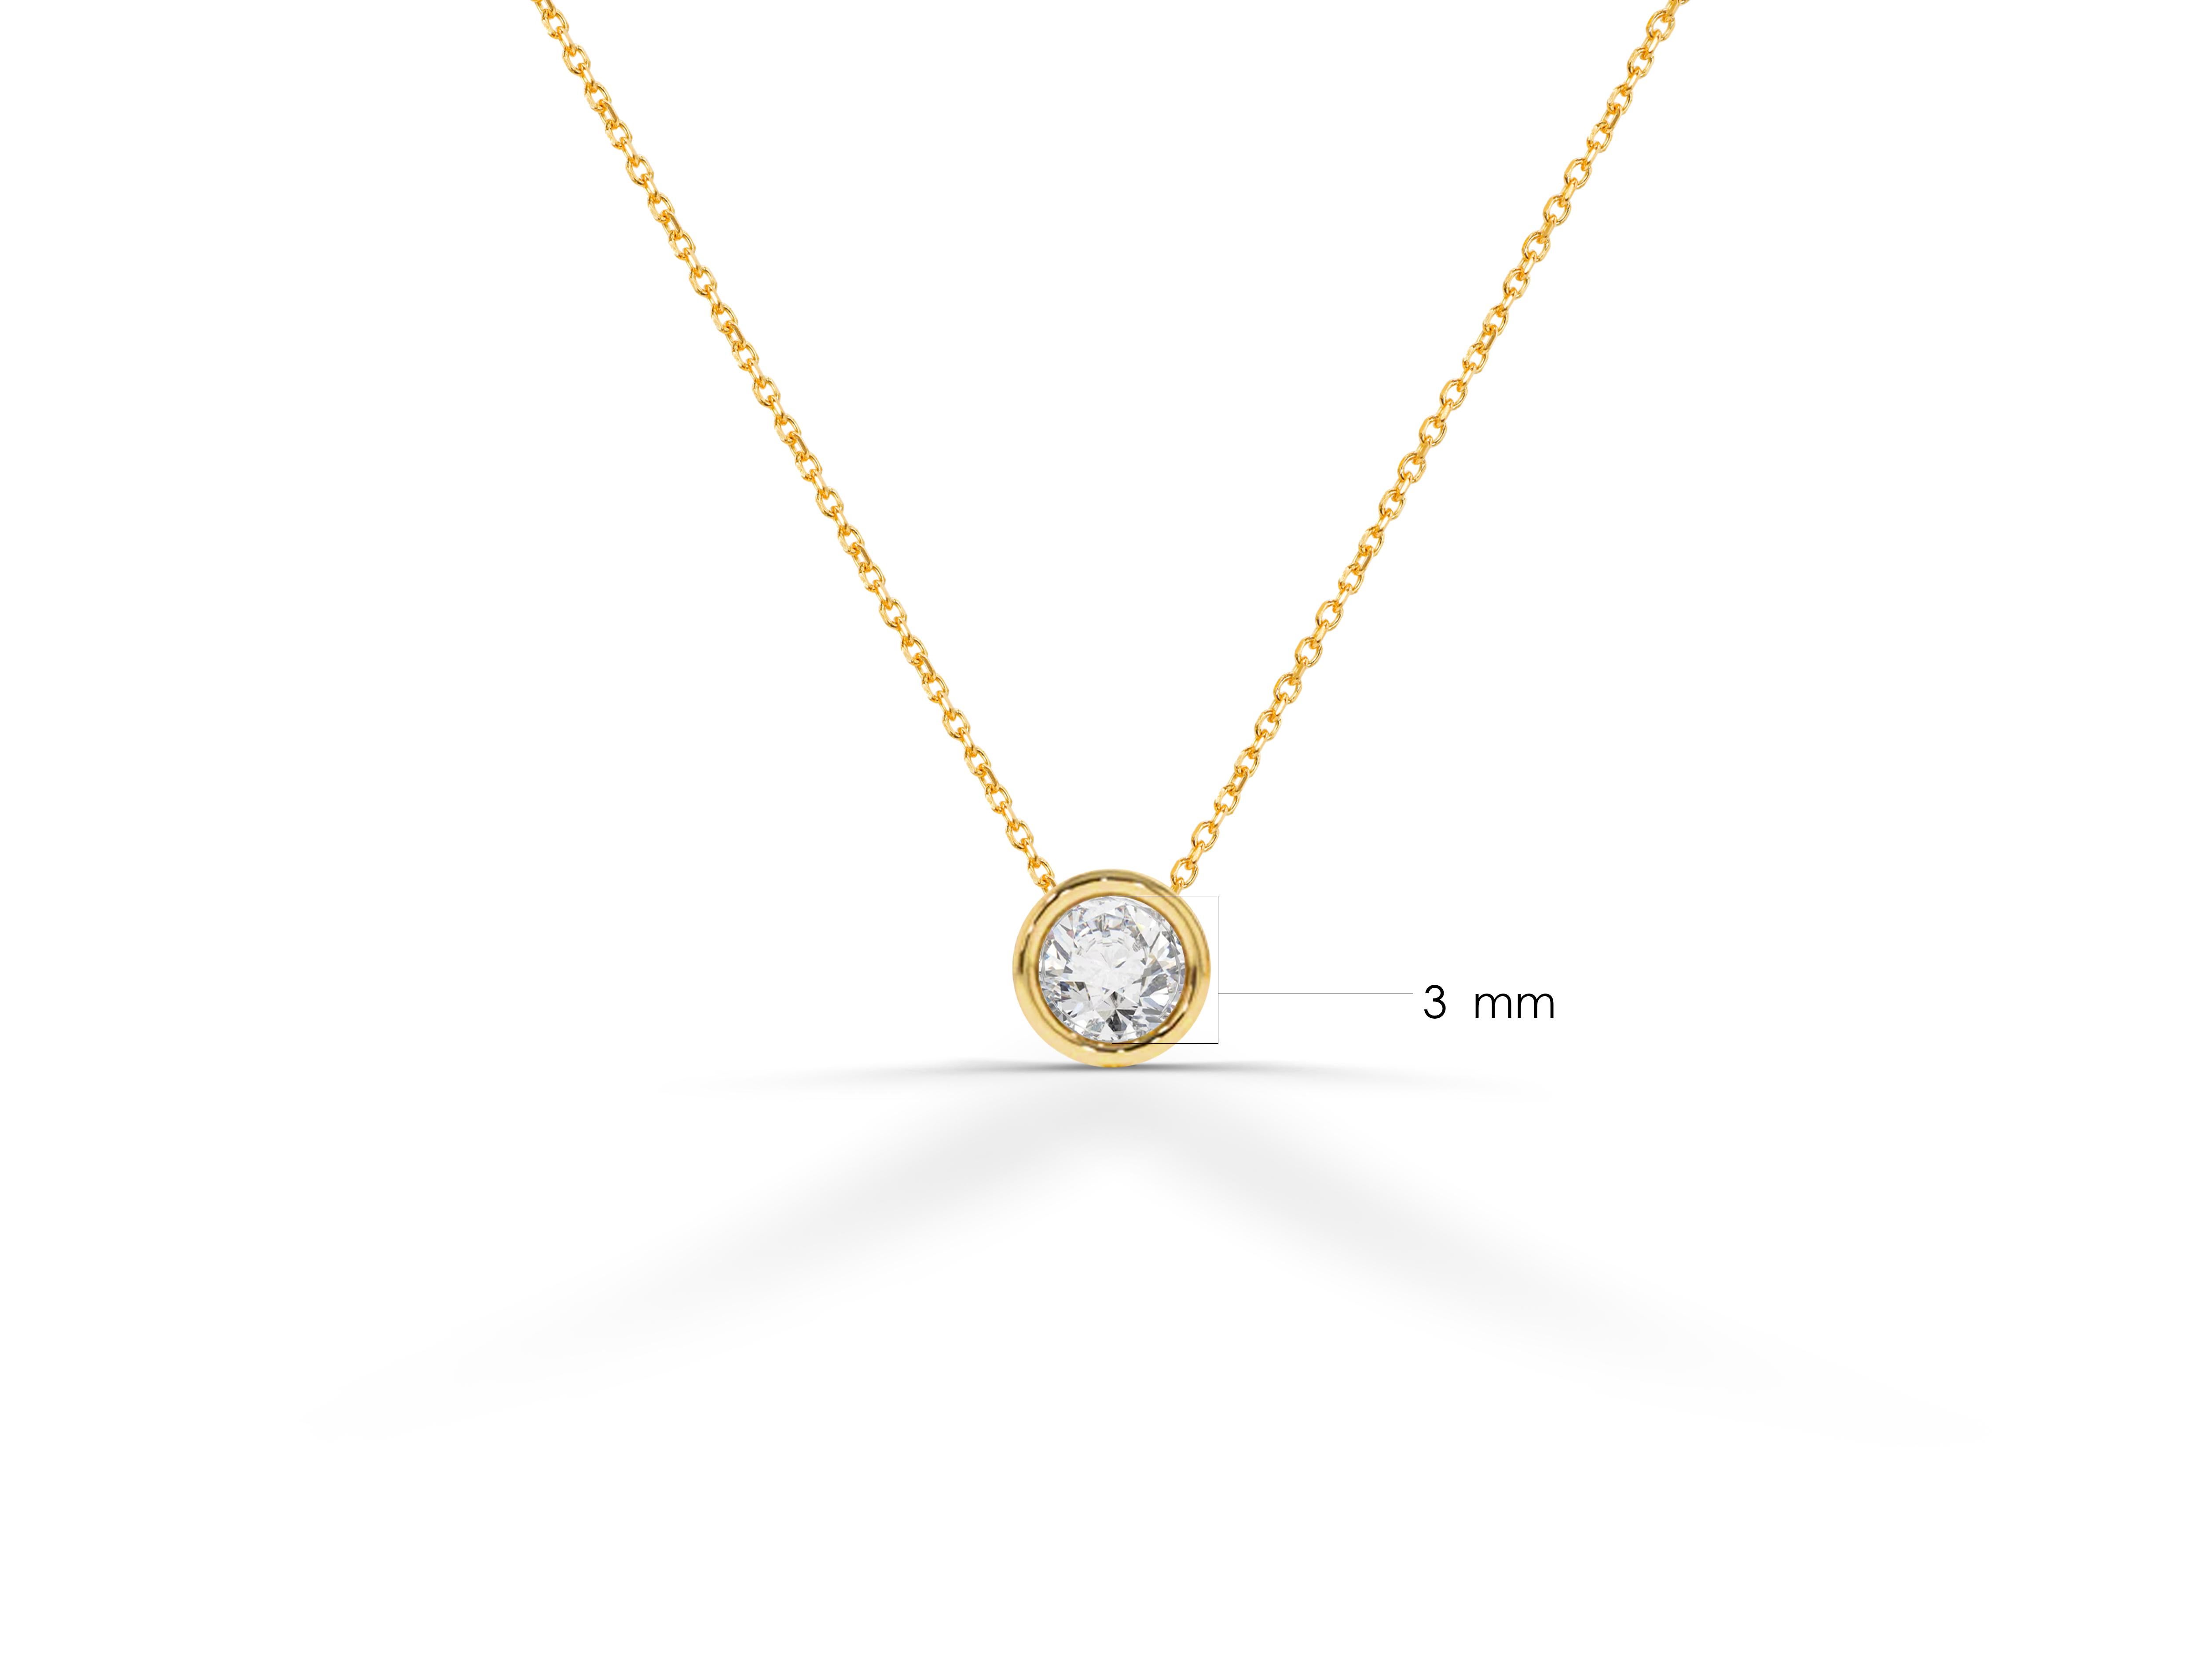 Brilliant White Sparkly Natural Diamond Necklace is made of 18k solid gold available in three colors, White Gold / Rose Gold / Yellow Gold.

Natural Diamond hanging in center of a thin dainty gold chain a perfect choice for everyday wear. It would